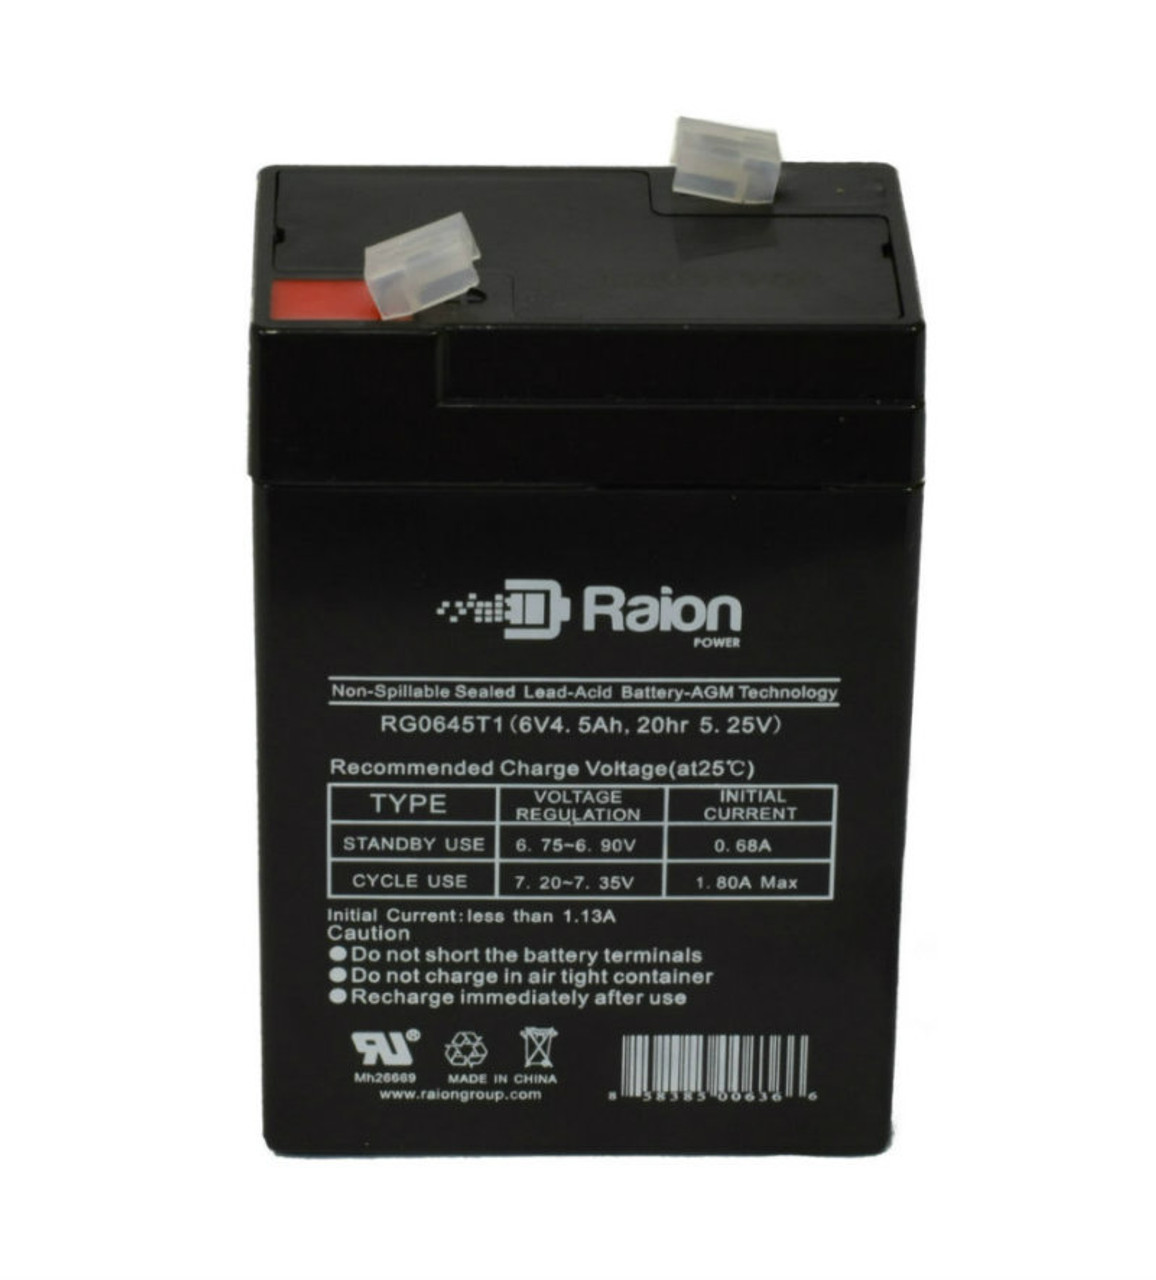 Raion Power RG0645T1 Replacement Battery Cartridge for Super Lucky Duck Combo Drake